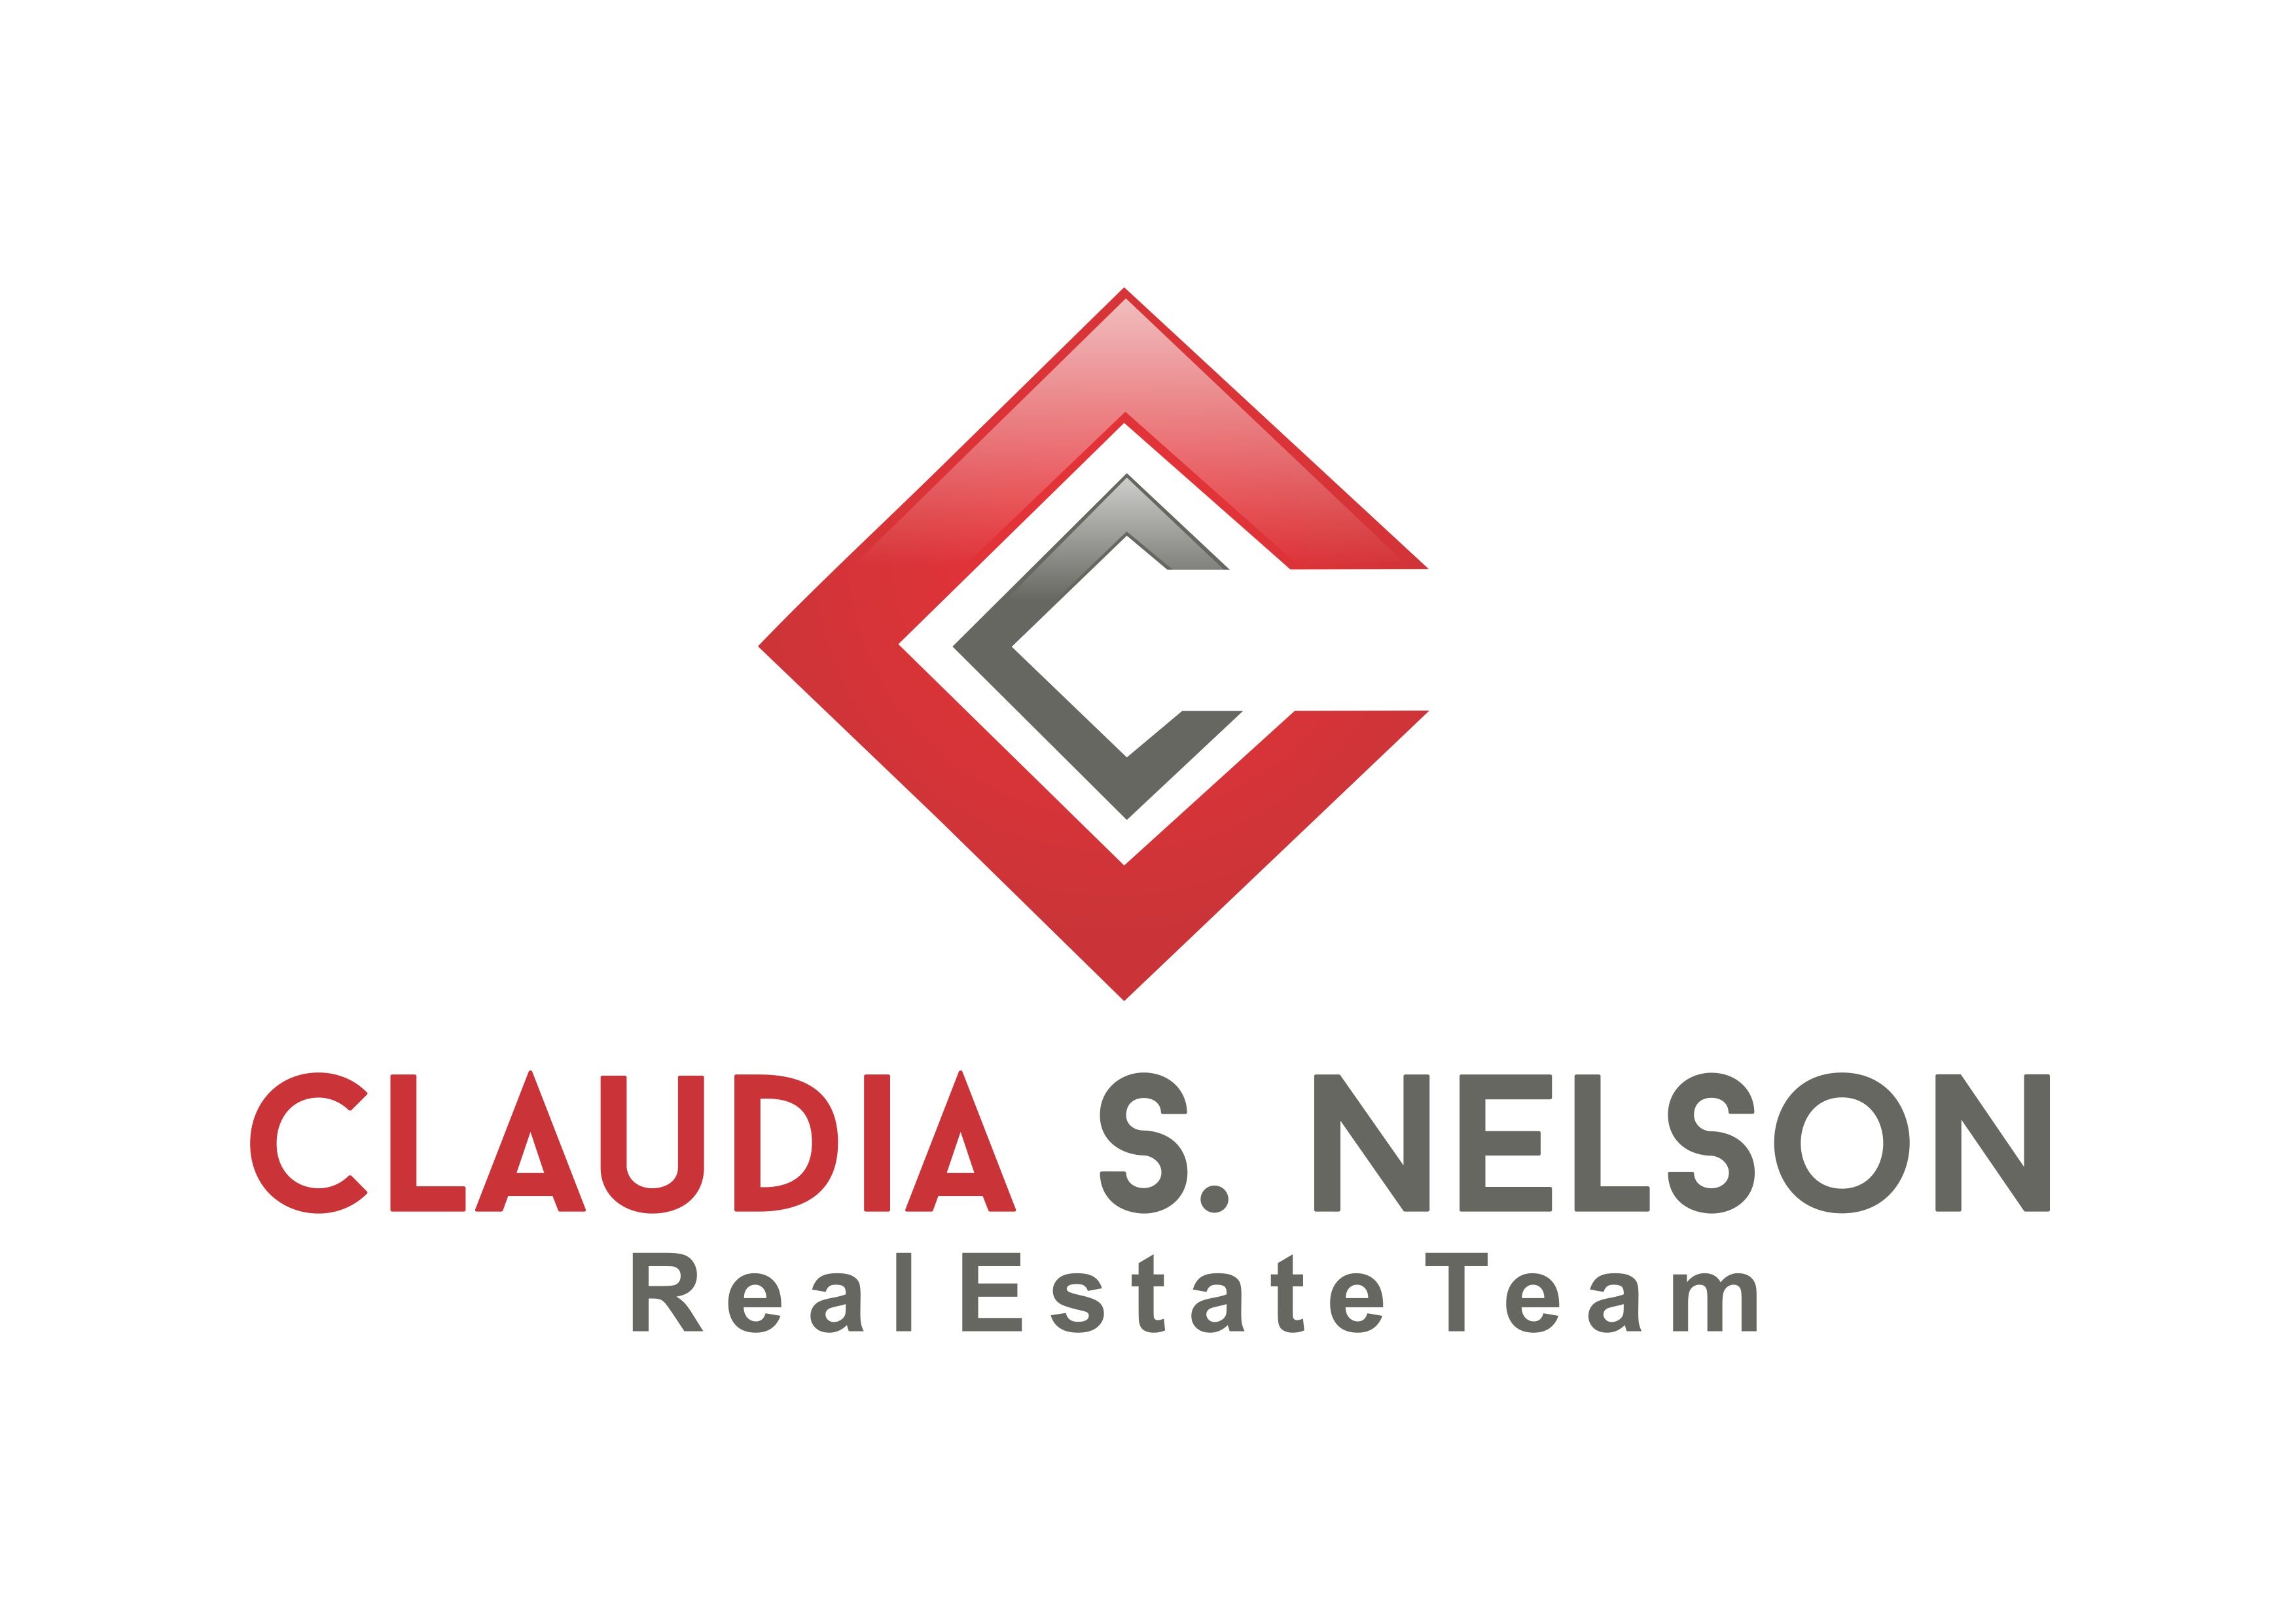 Claudia S. Nelson Real Estate Team